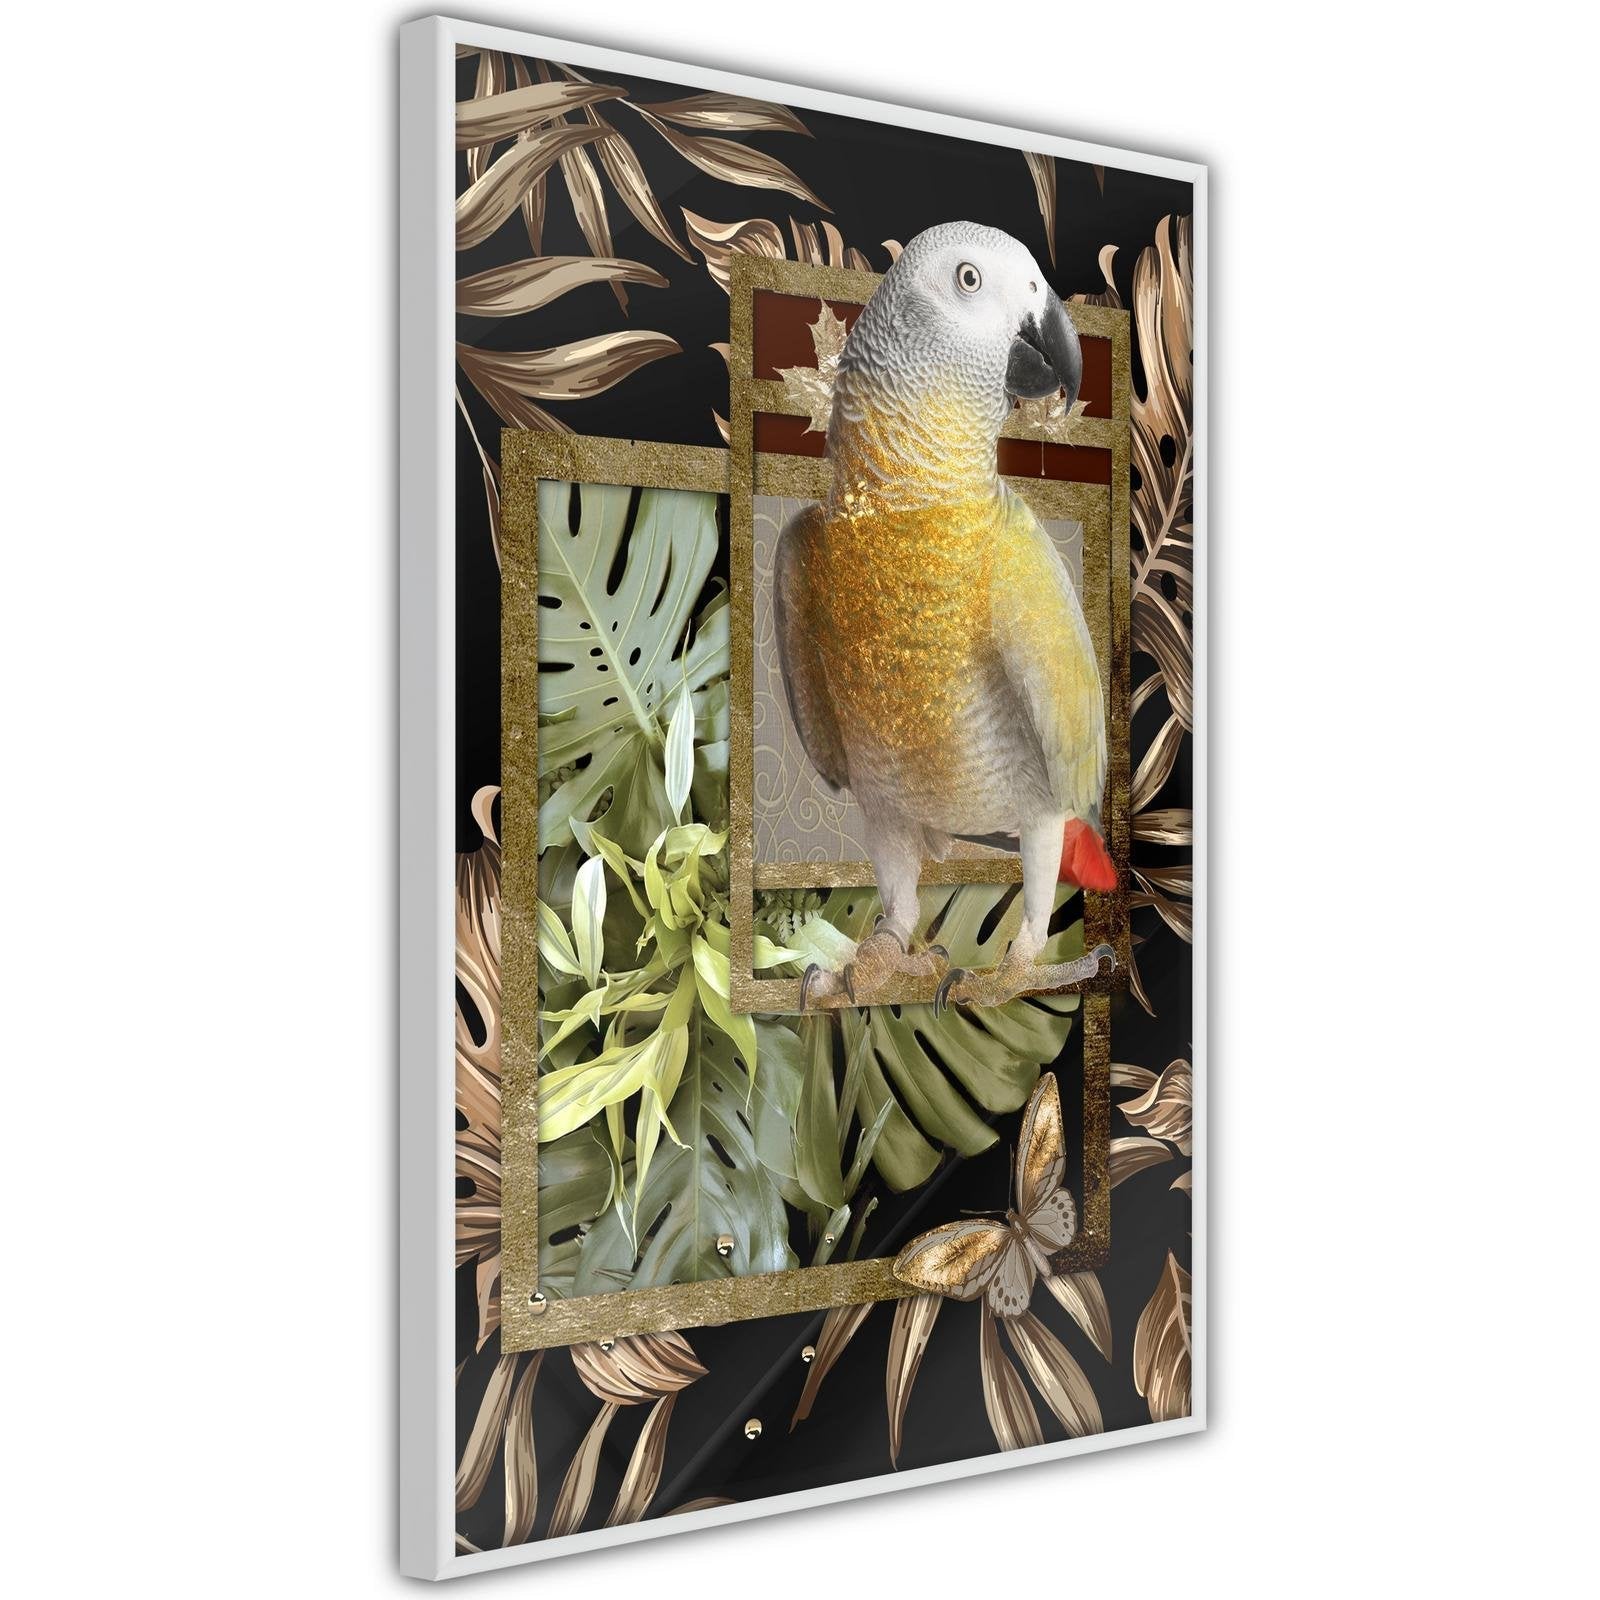 Inramad Poster / Tavla - Composition with Gold Parrot-Poster Inramad-Artgeist-peaceofhome.se